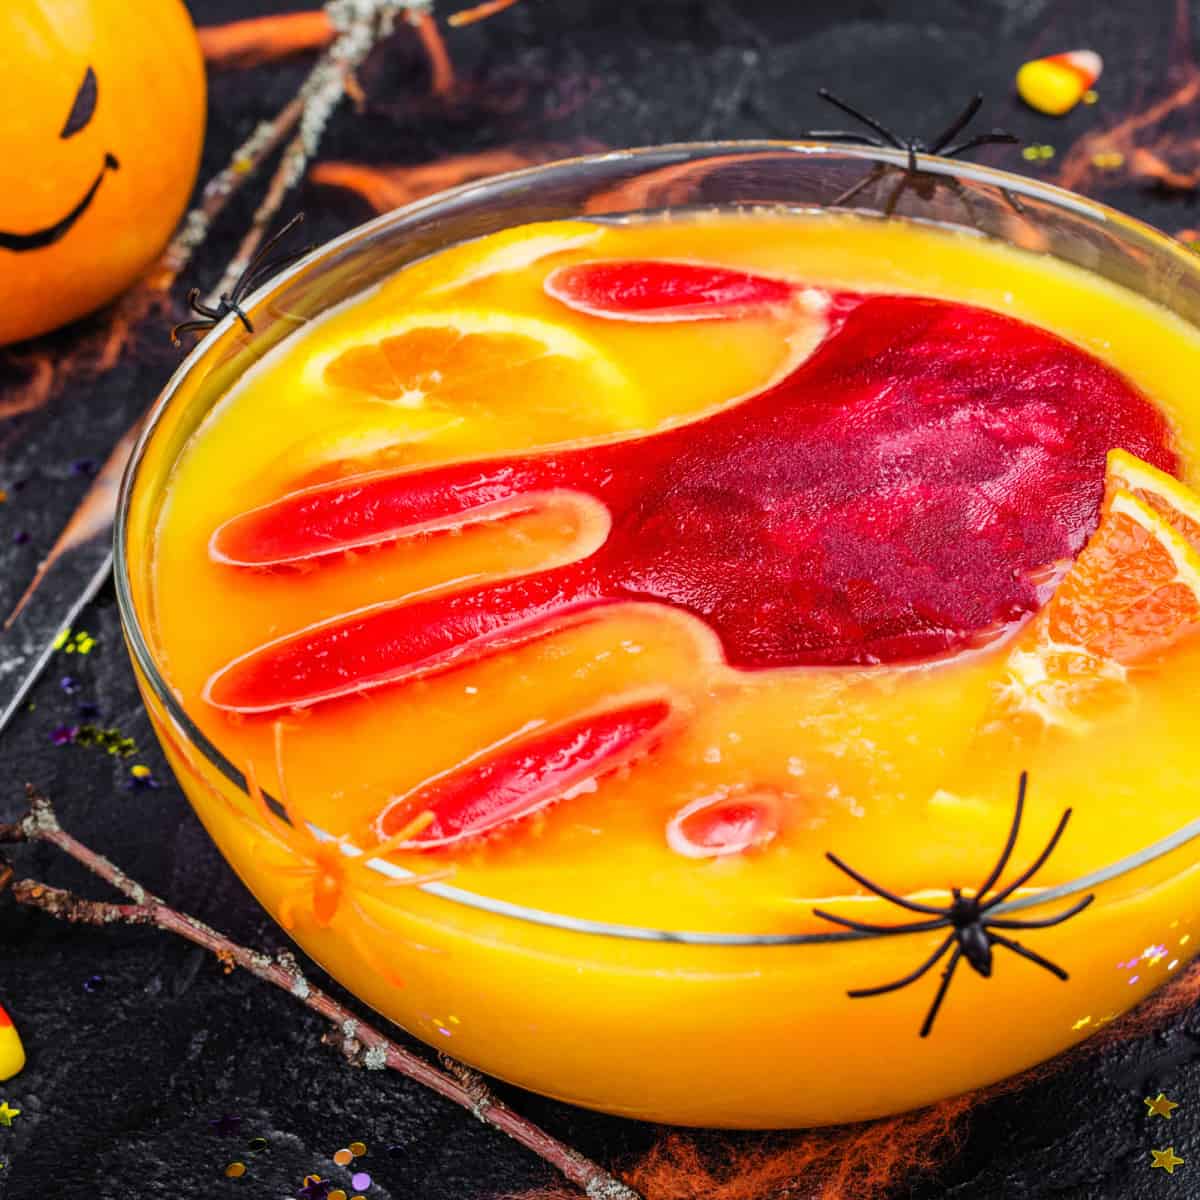 Scary halloween punch with red hand print in orange punch